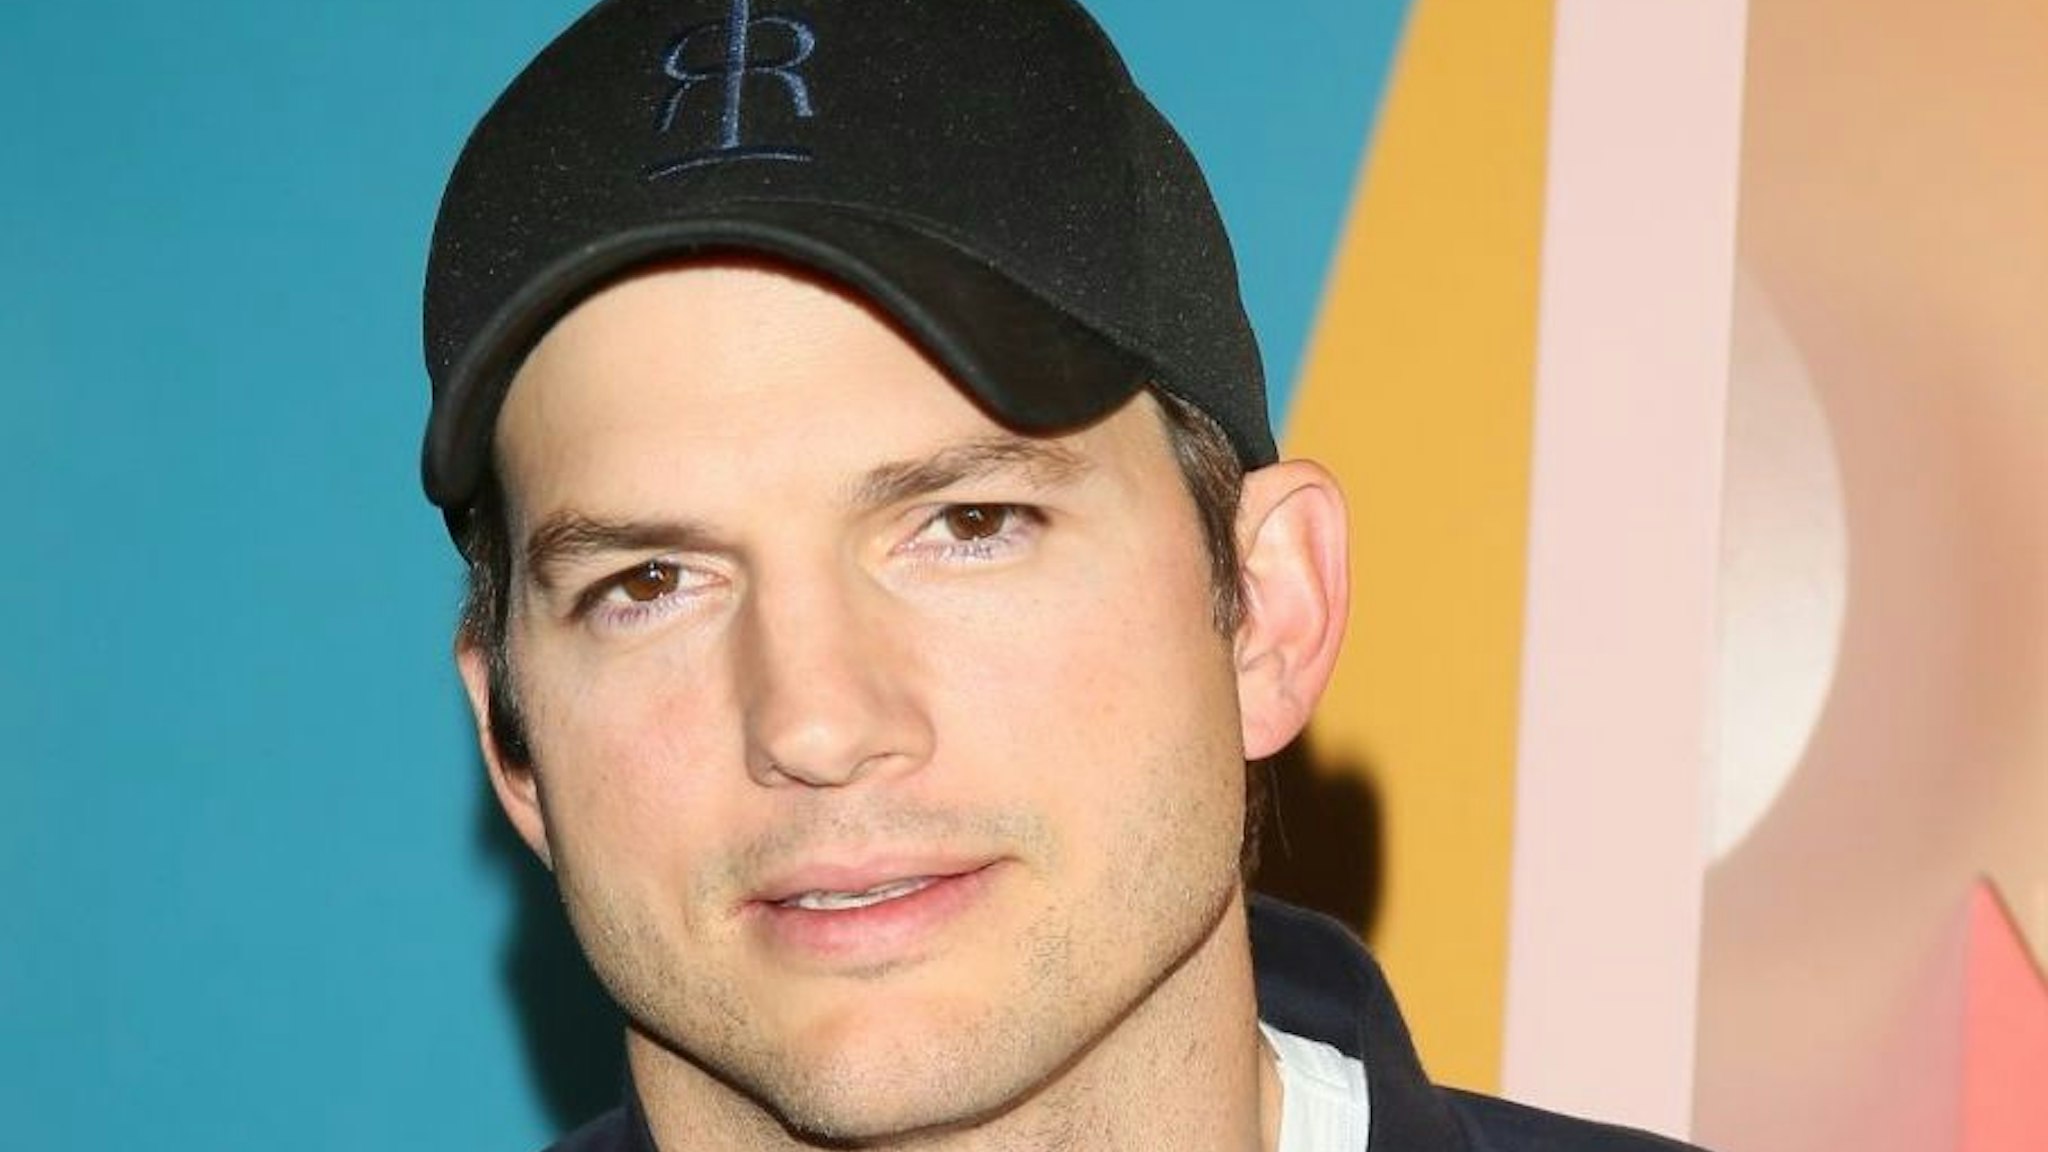 Ashton Kutcher attends WeWork Presents Second Annual Creator Global Finals at Microsoft Theater on January 9, 2019 in Los Angeles, California.